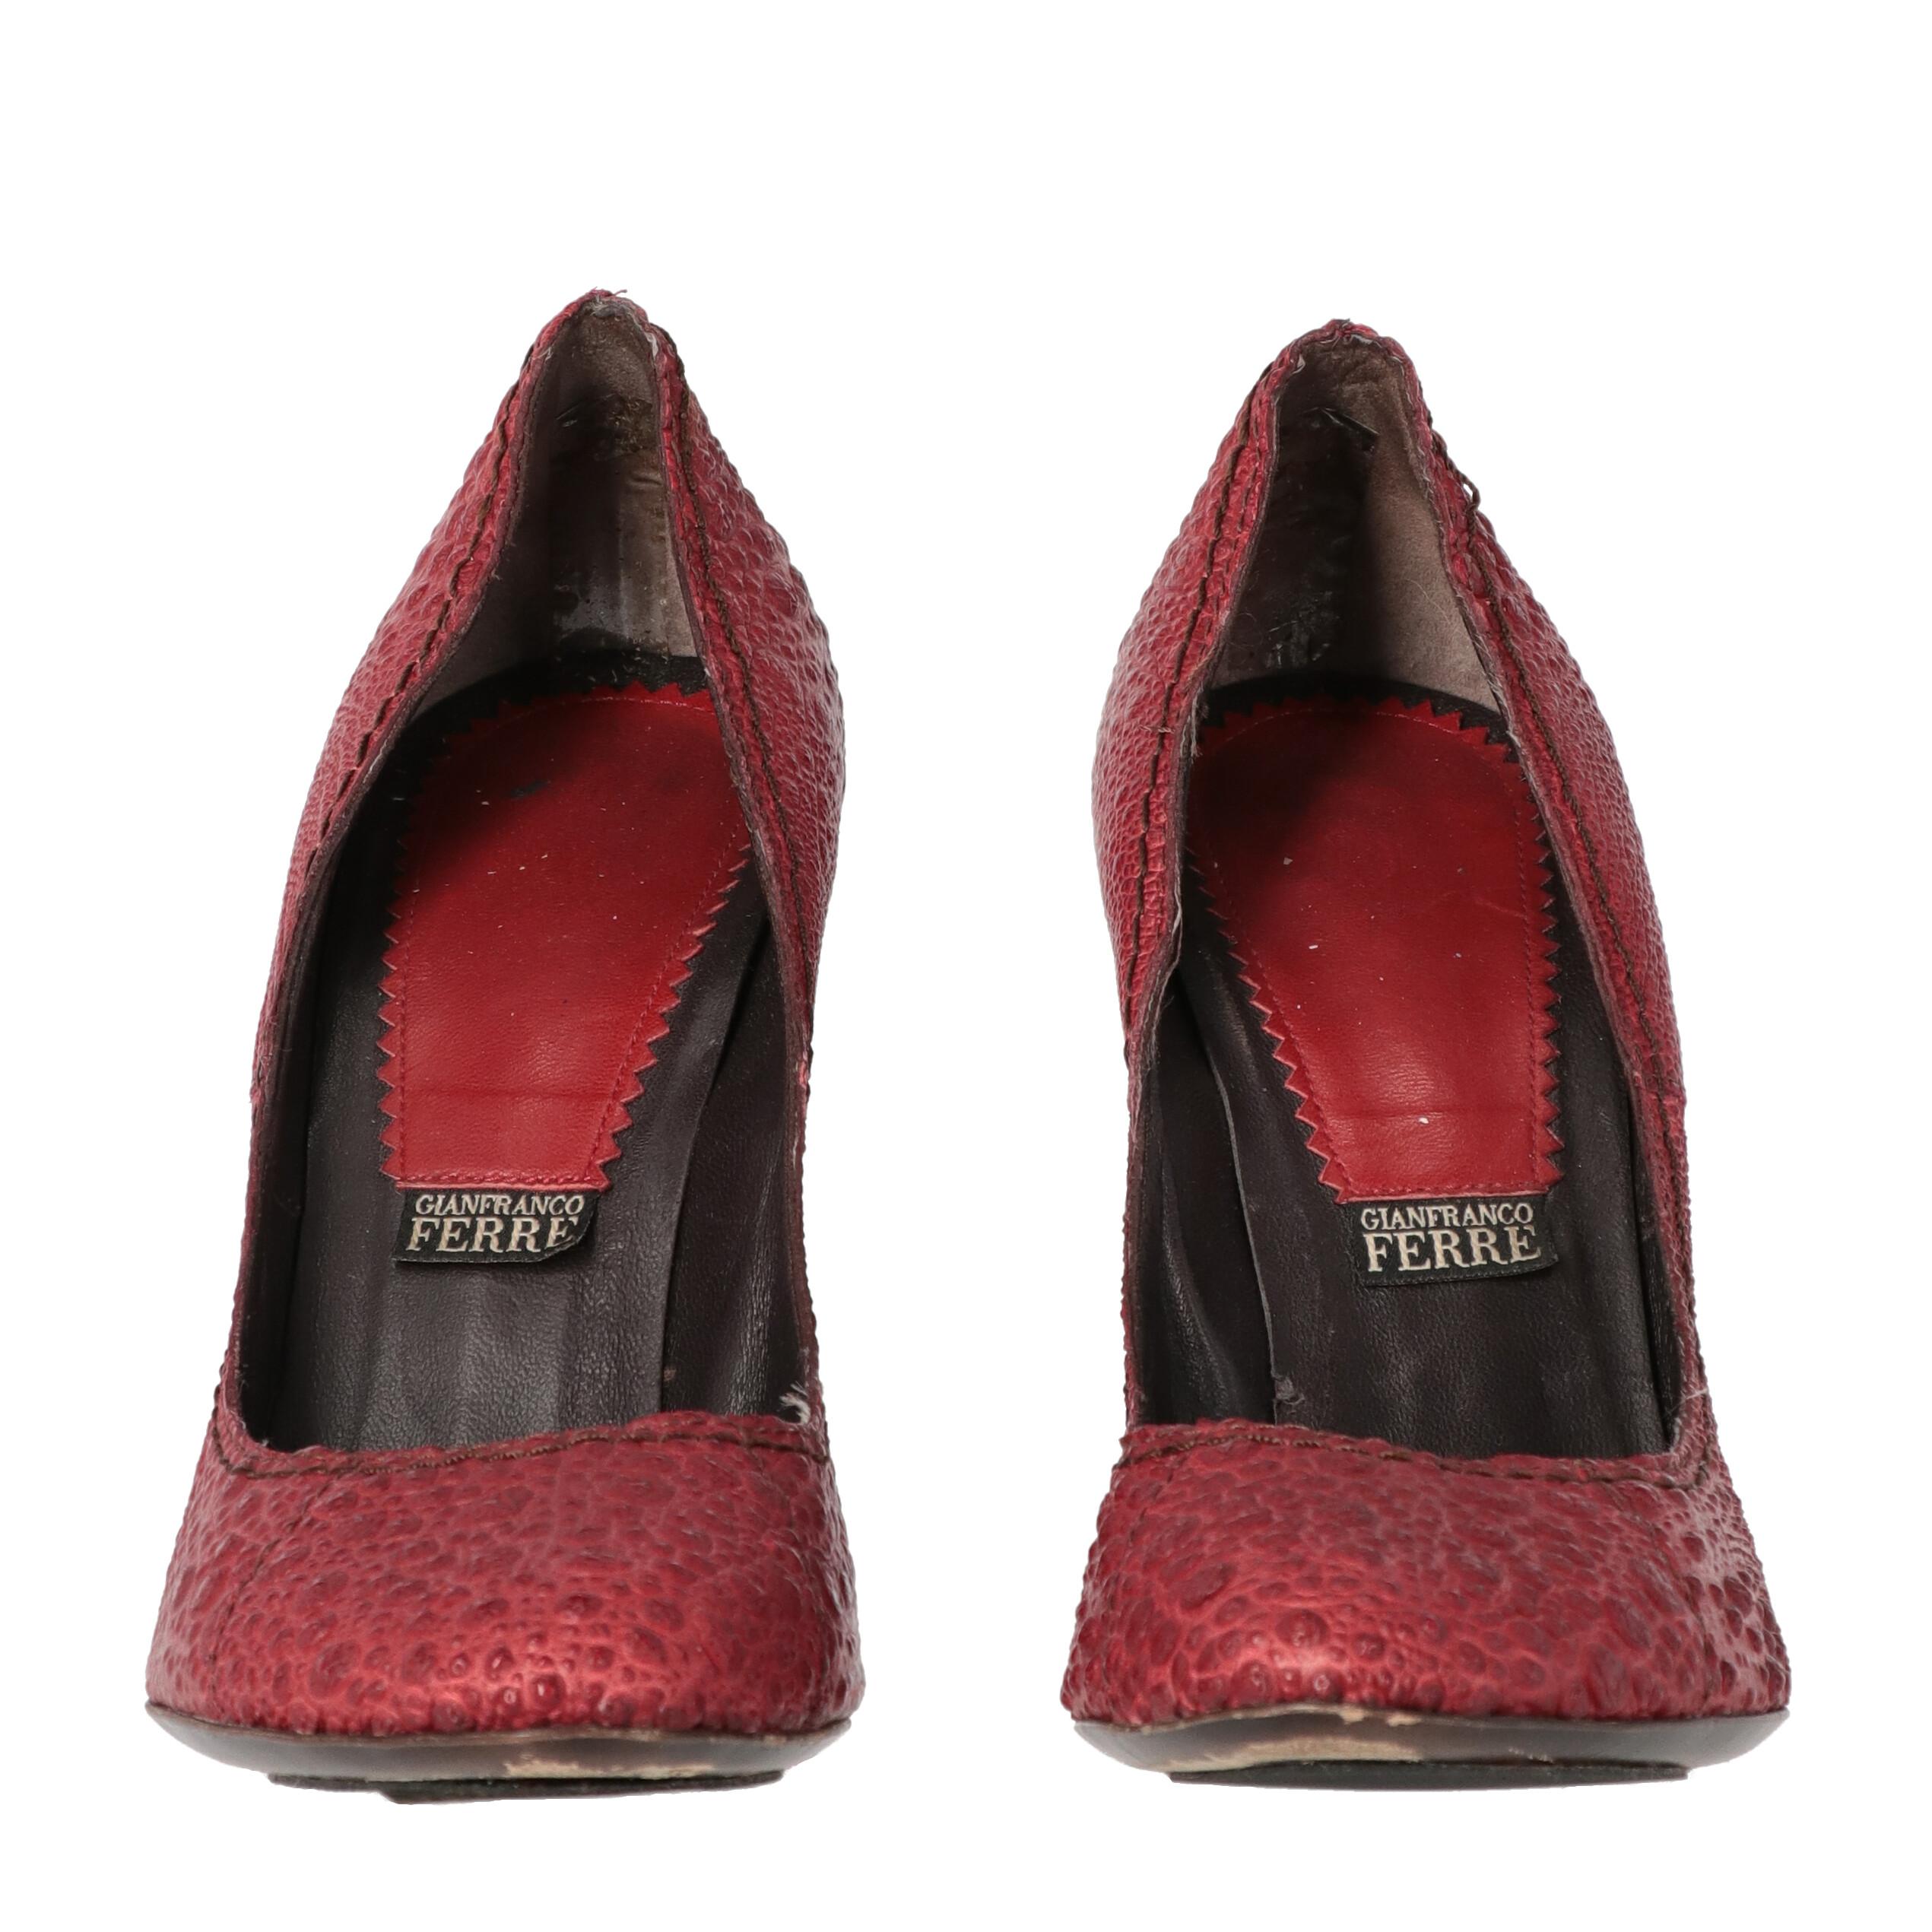 2000s Gianfranco Ferré Vintage Red Leather Pumps with Crocodile Effect In Excellent Condition For Sale In Lugo (RA), IT